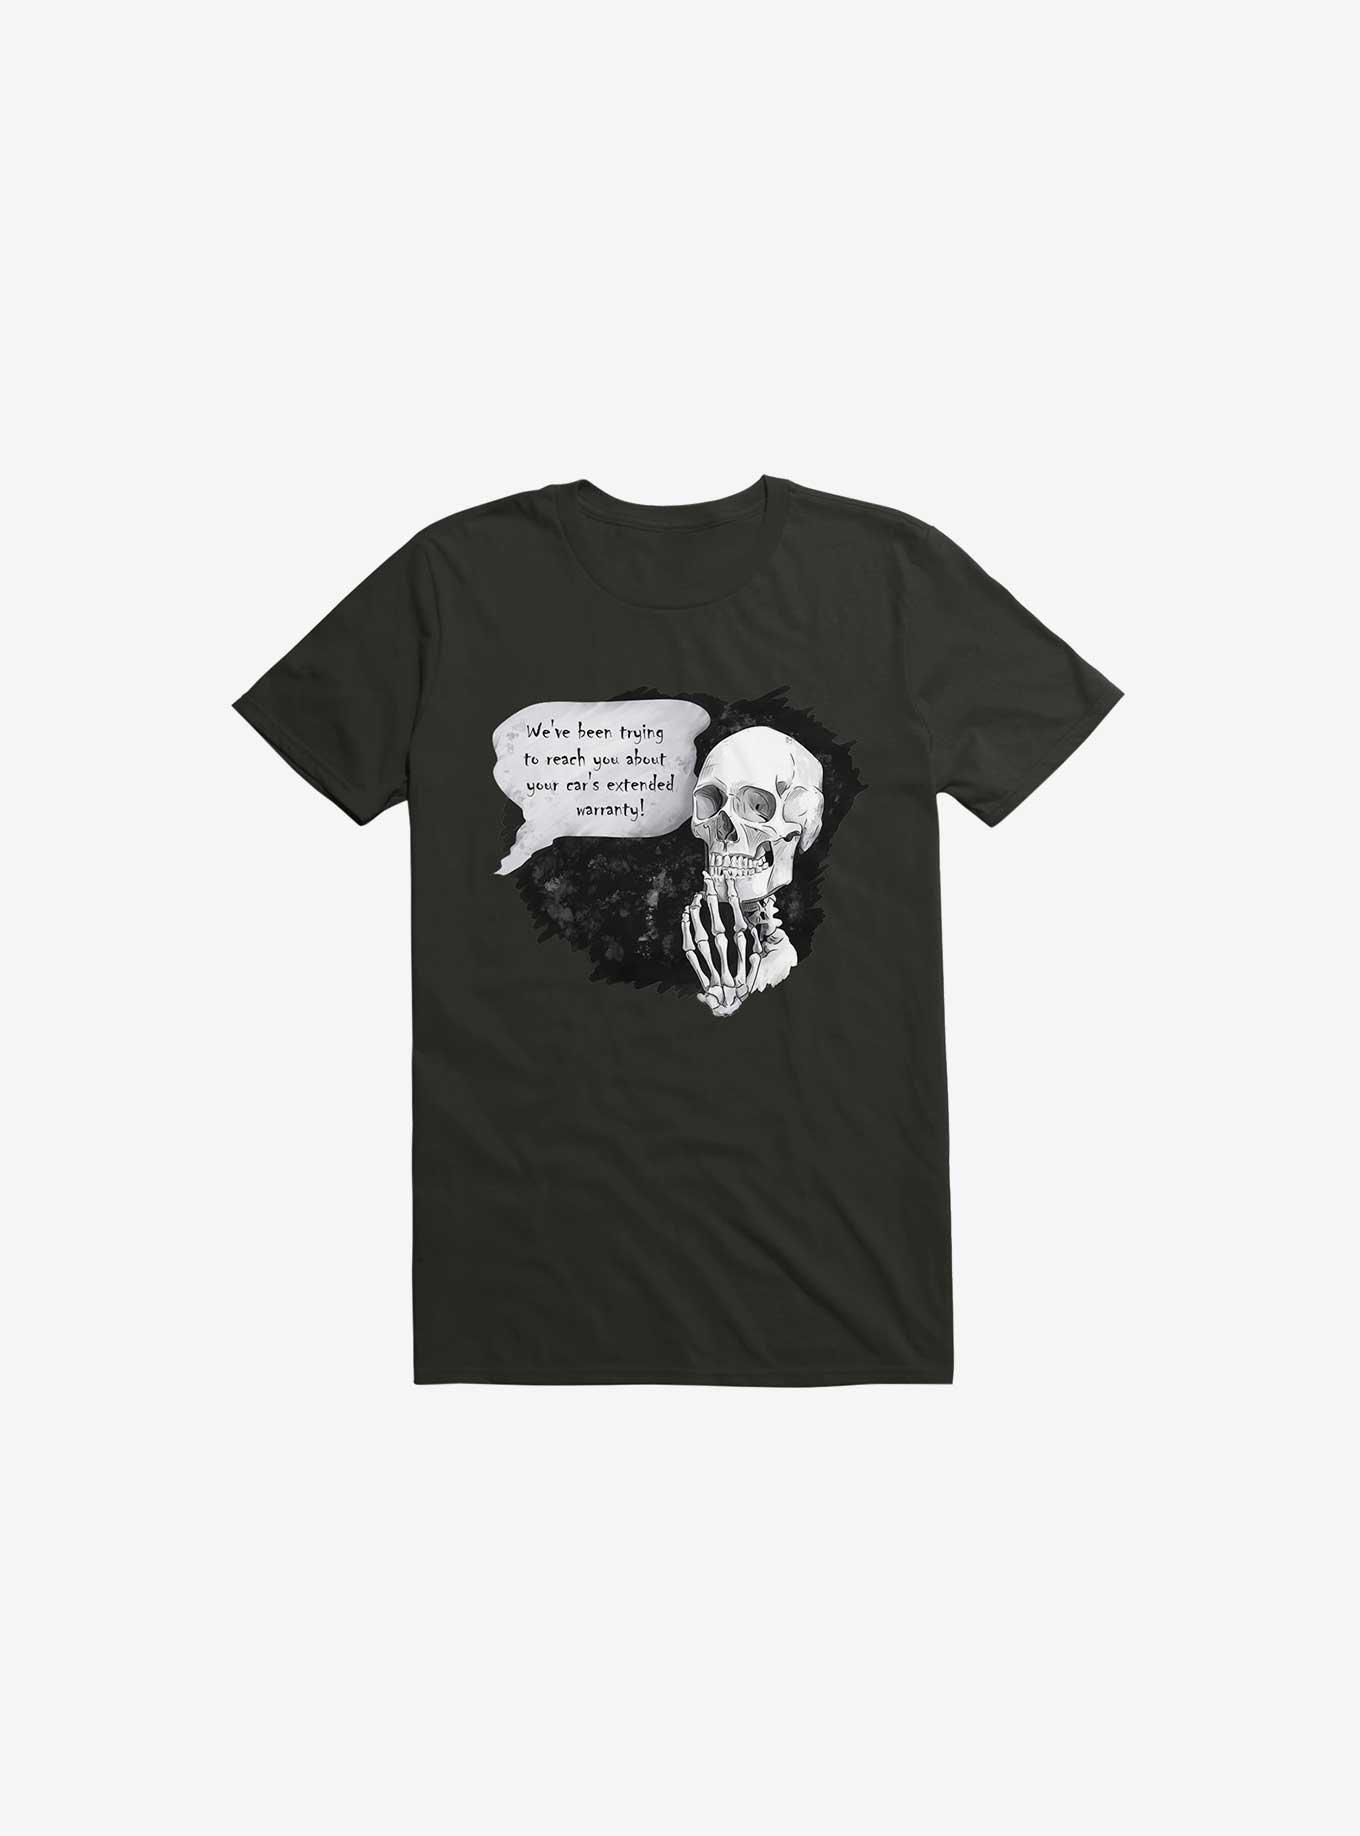 We've been trying to reach you... T-Shirt, BLACK, hi-res